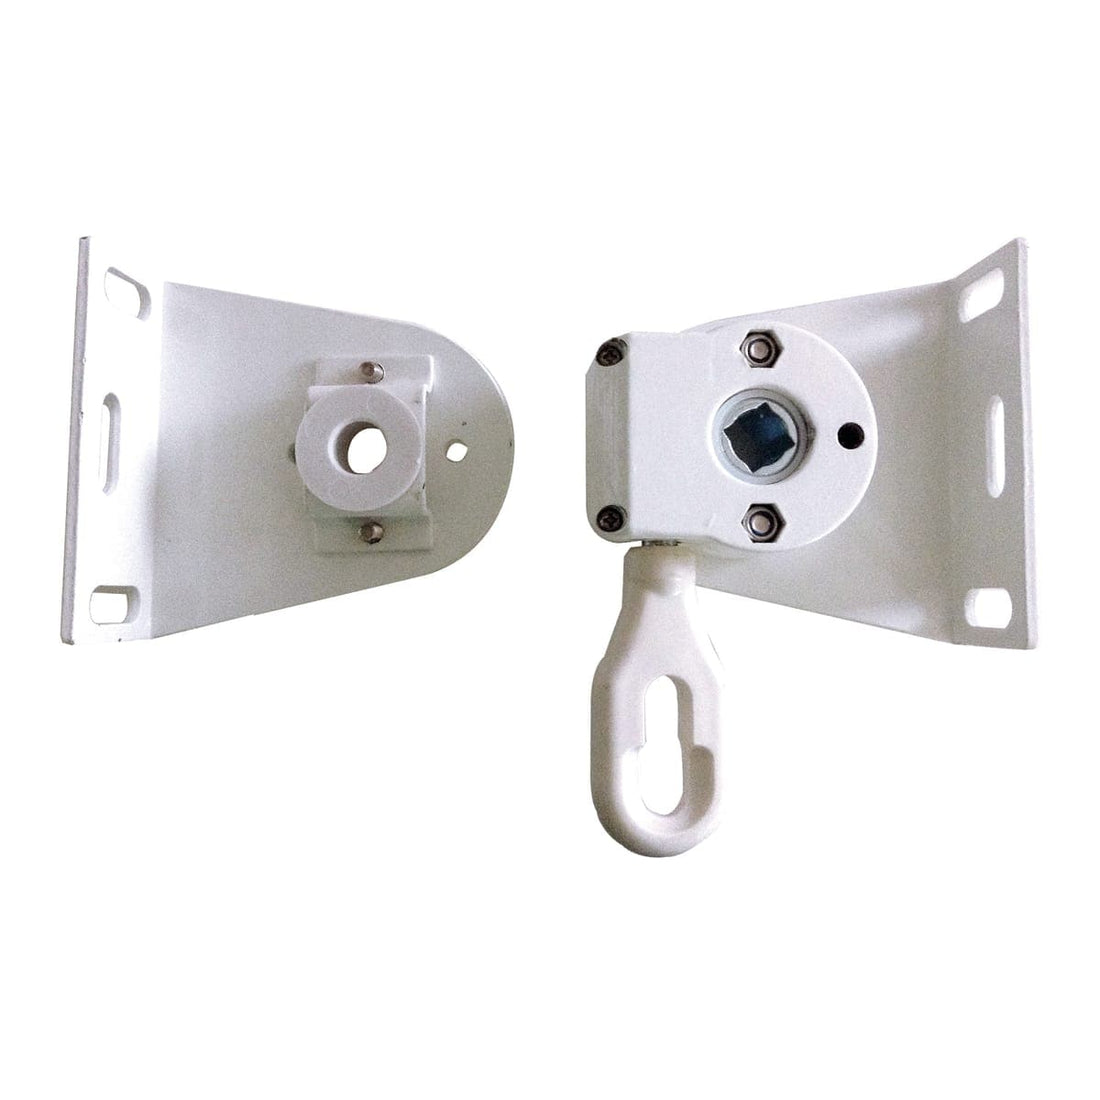 PAIR OF RIGHT/LEFT BRACKETS WITH CURTAIN WINCH